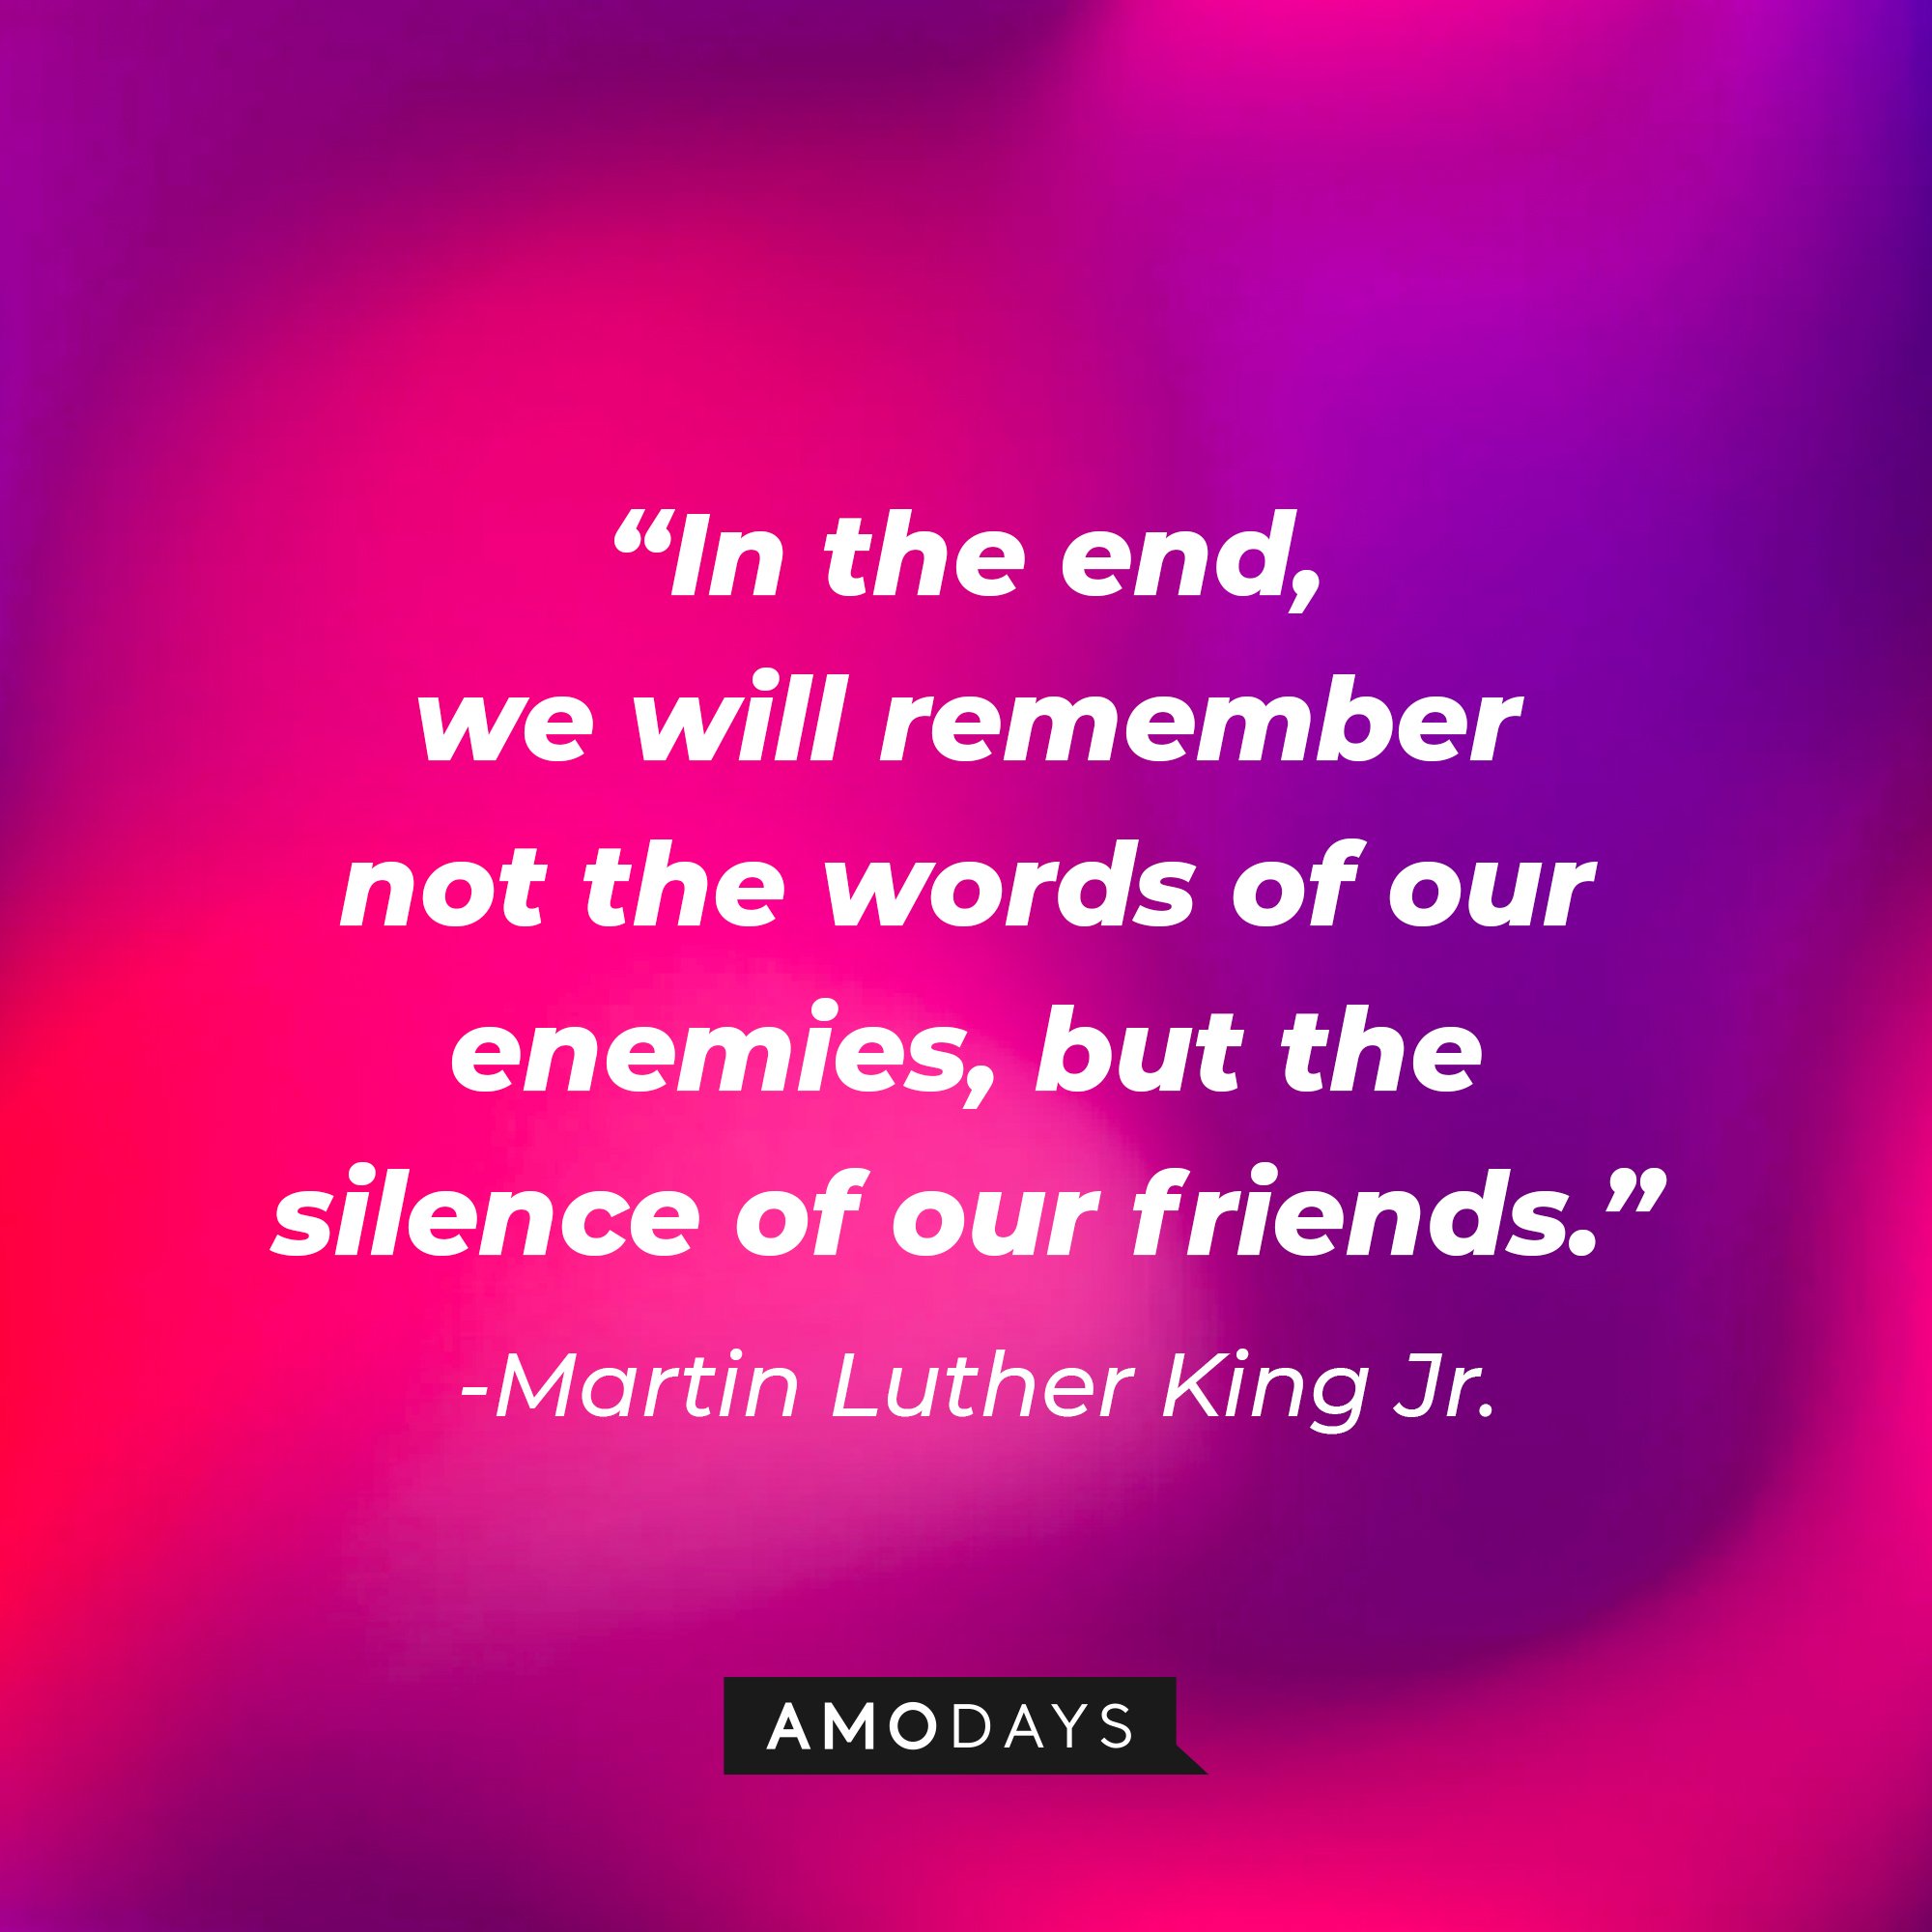 Martin Luther King Jr.'s quote:\\\\u00a0"In the end, we will remember not the words of our enemies, but the silence of our friends."\\\\u00a0| Image: AmoDays